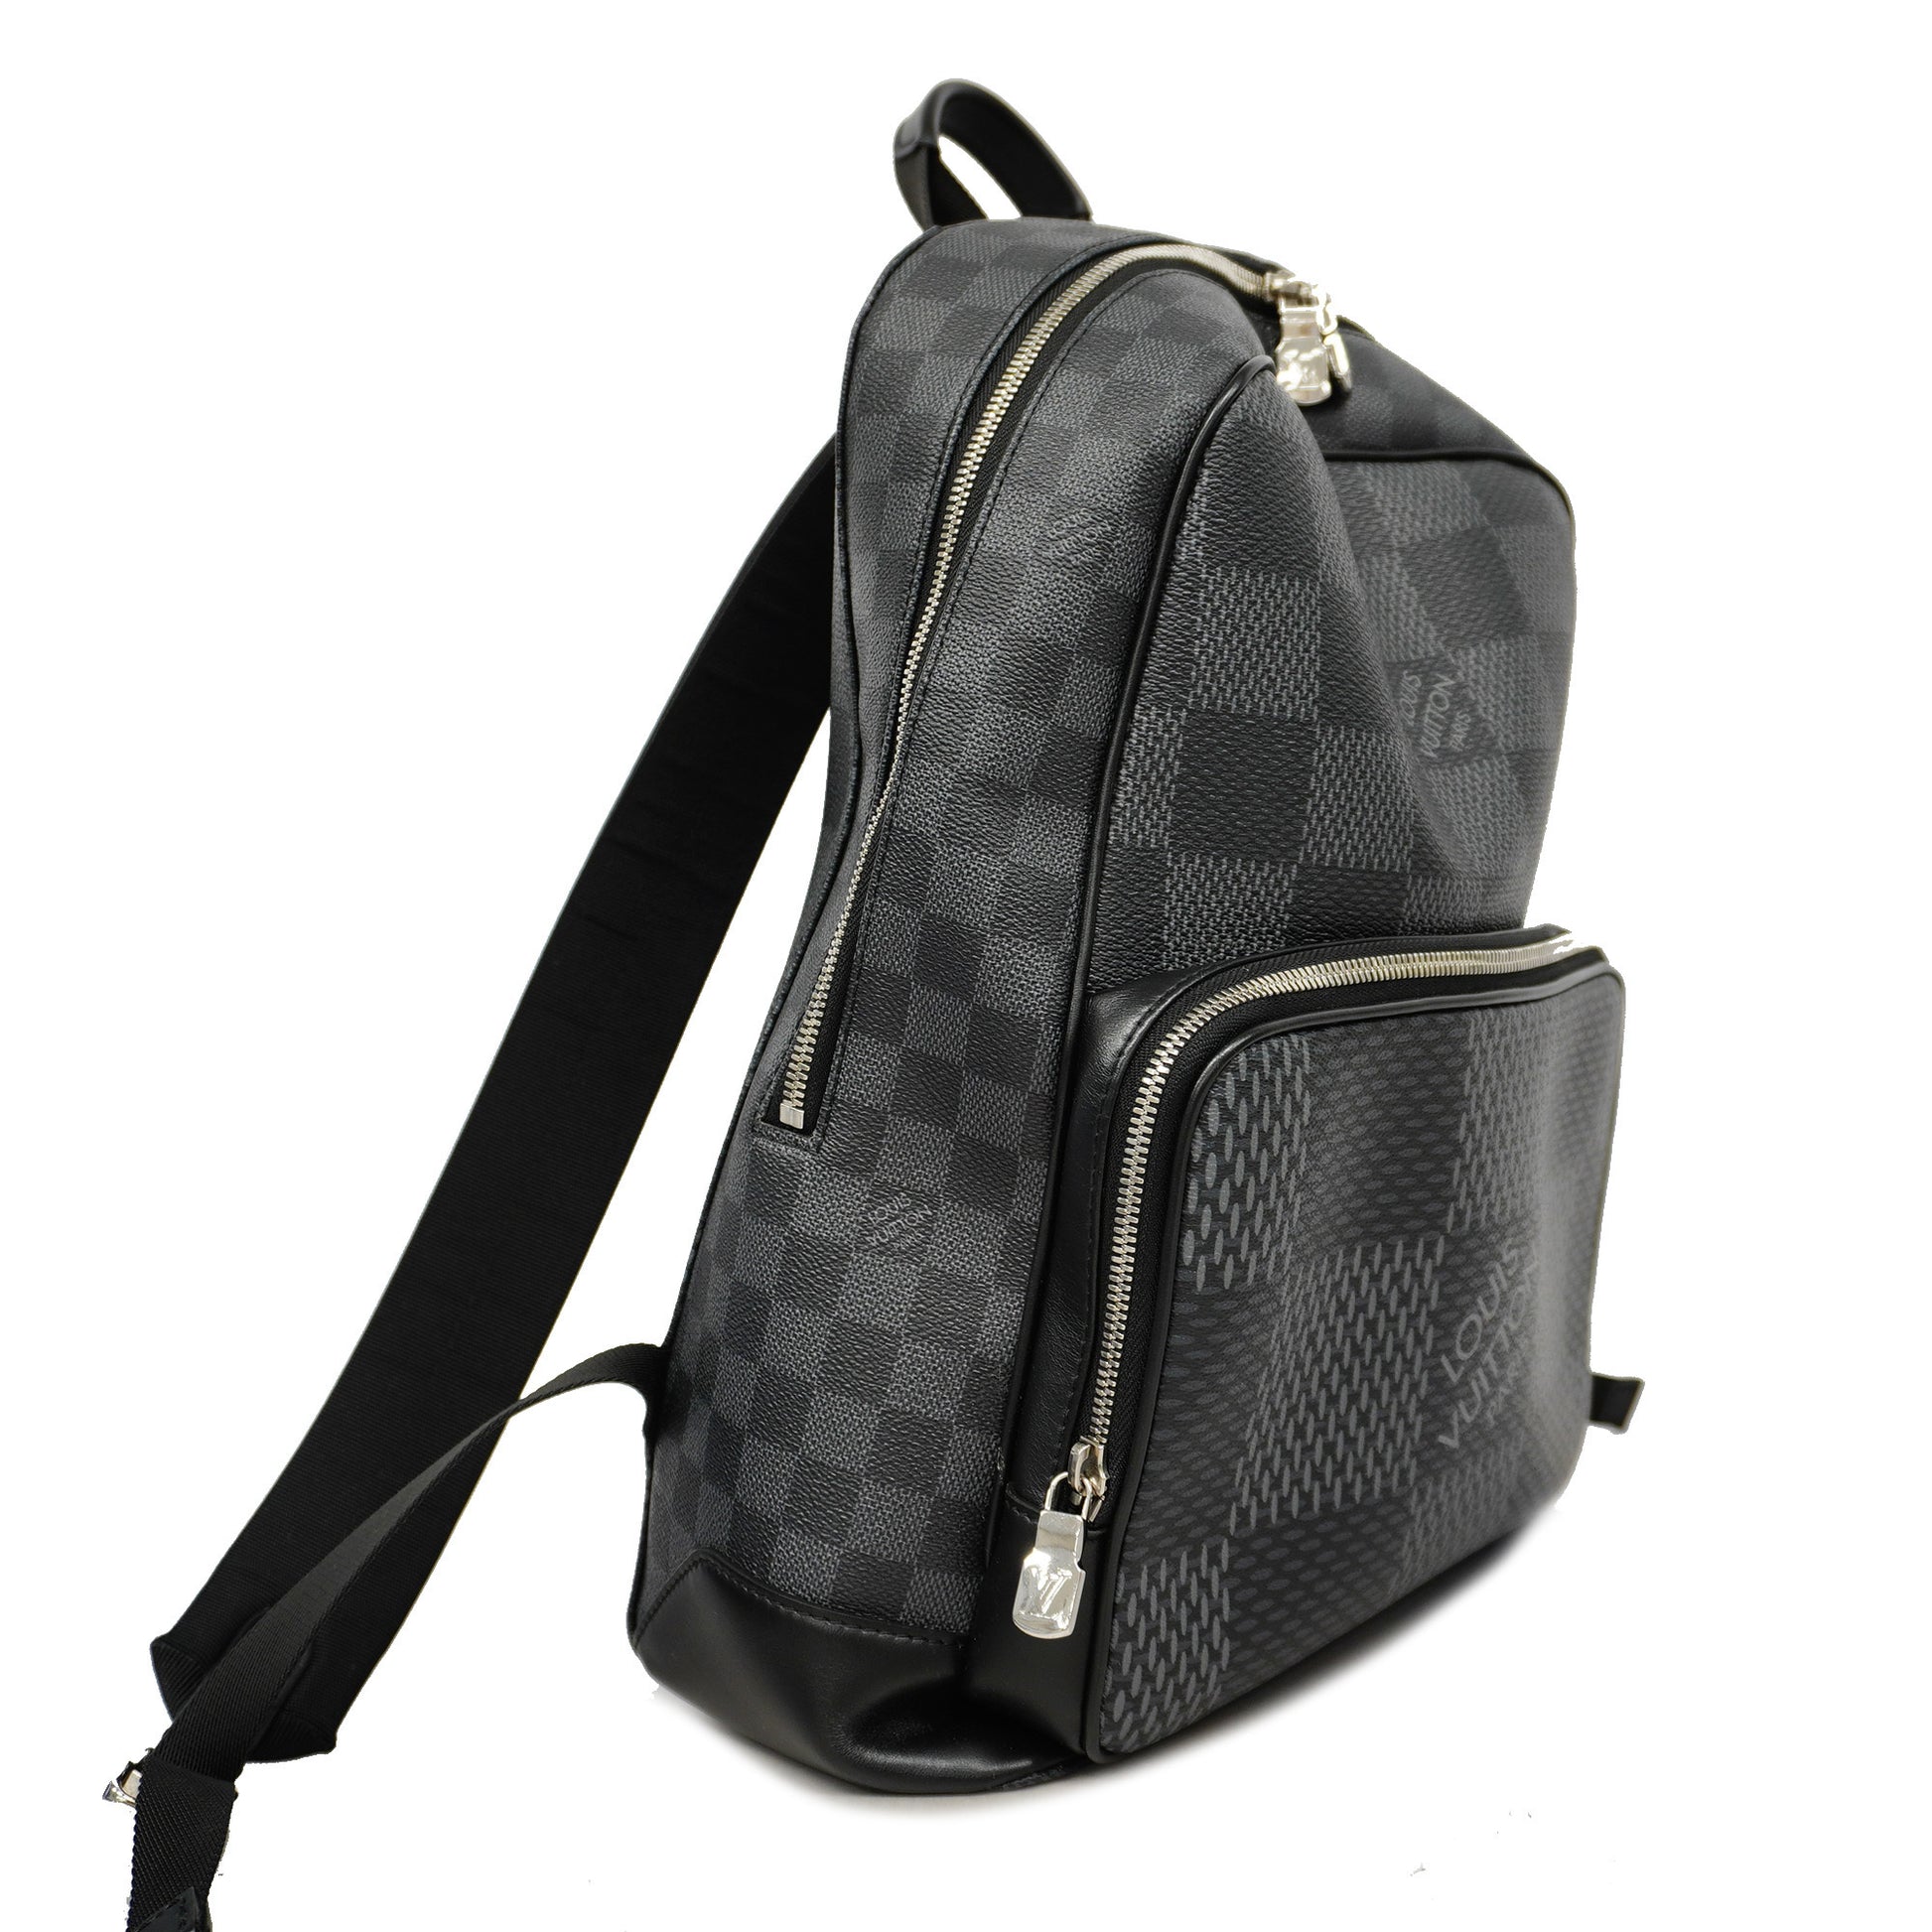 Shop Louis Vuitton DAMIER Campus backpack (N50009) by ☆MIMOSA